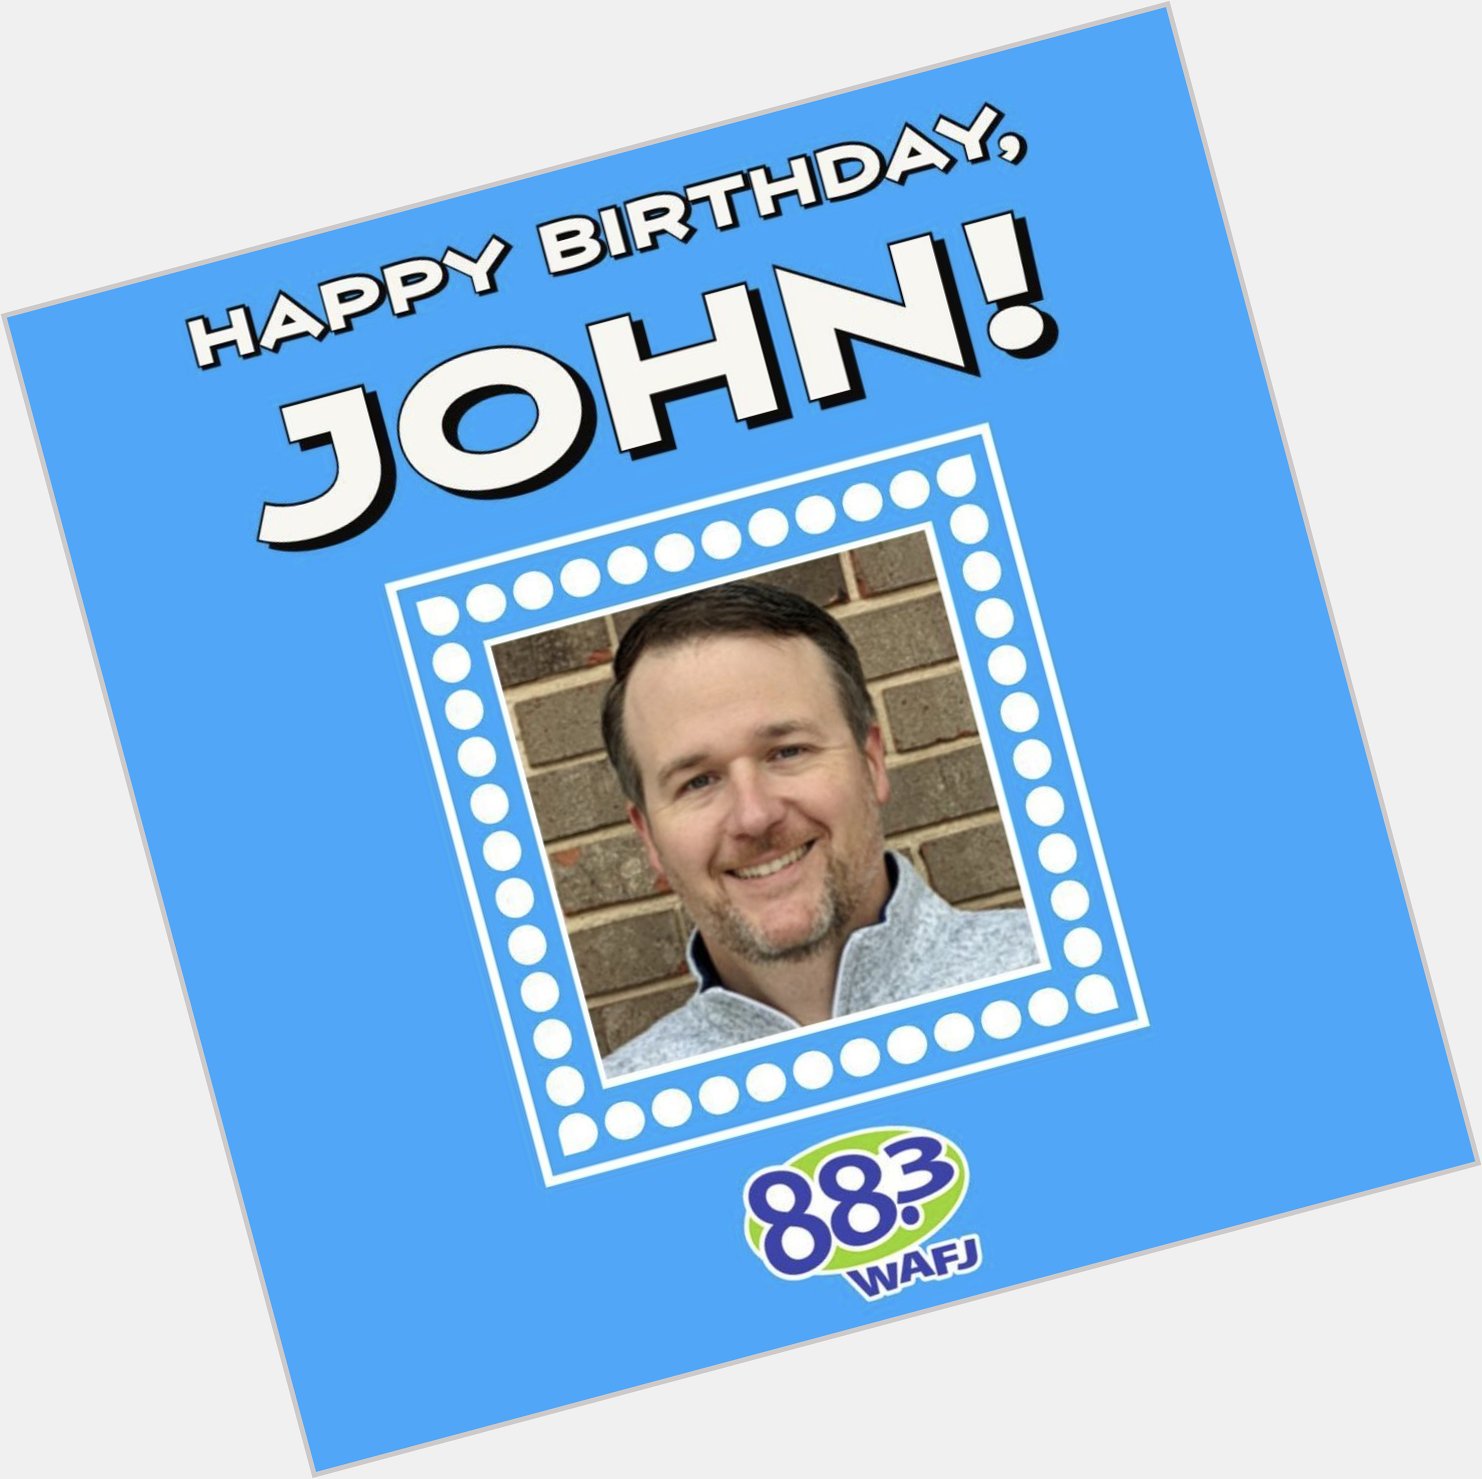  Wishing a very happy birthday to our station manager, John Bryant! 